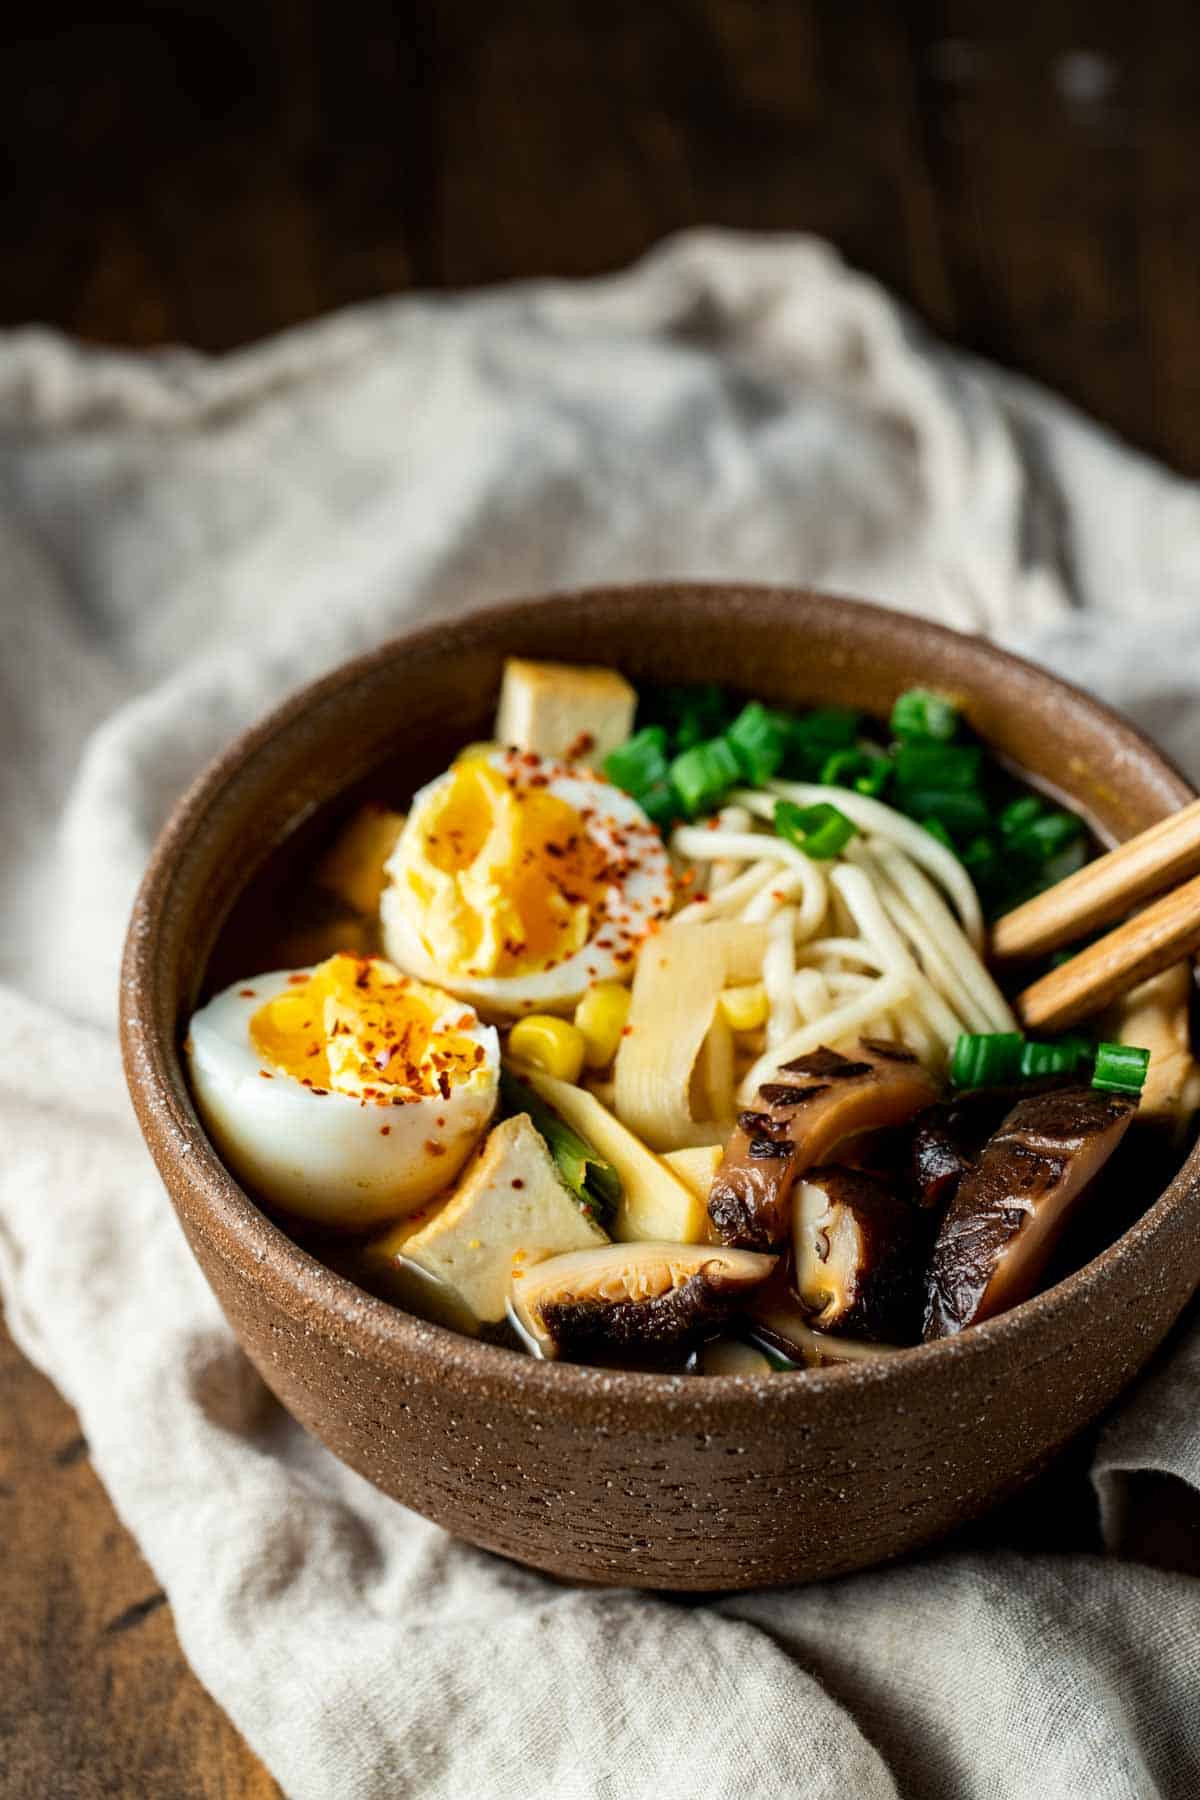 cooked ramen, eggs, vegetables, and meat in a brown bowl with chopsticks on a white towel